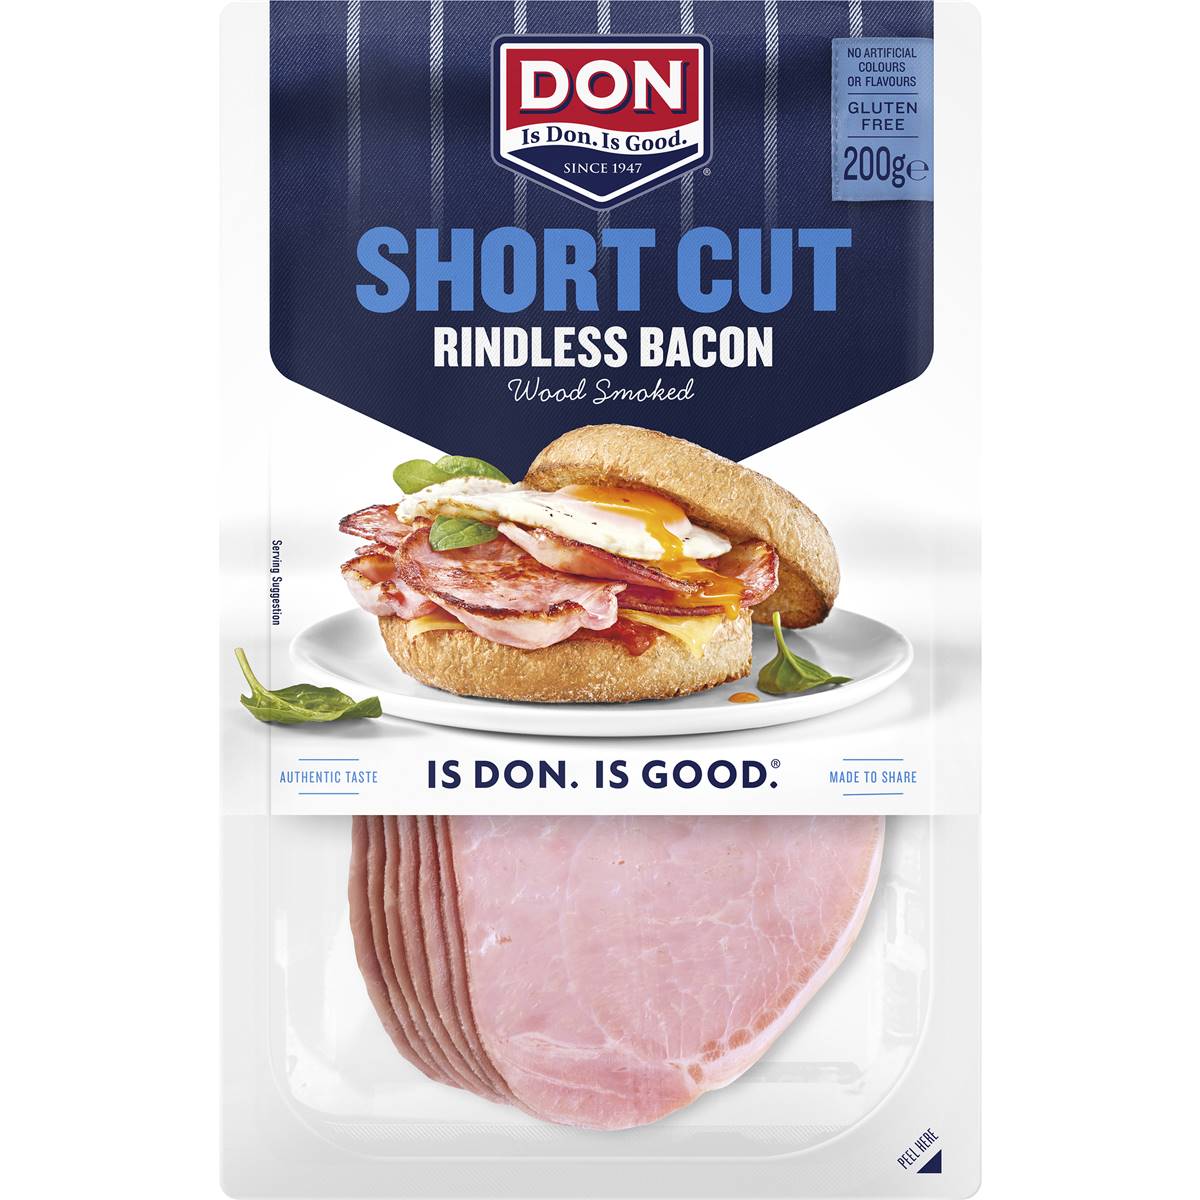 Calories in Don Short Cut Rindless Bacon